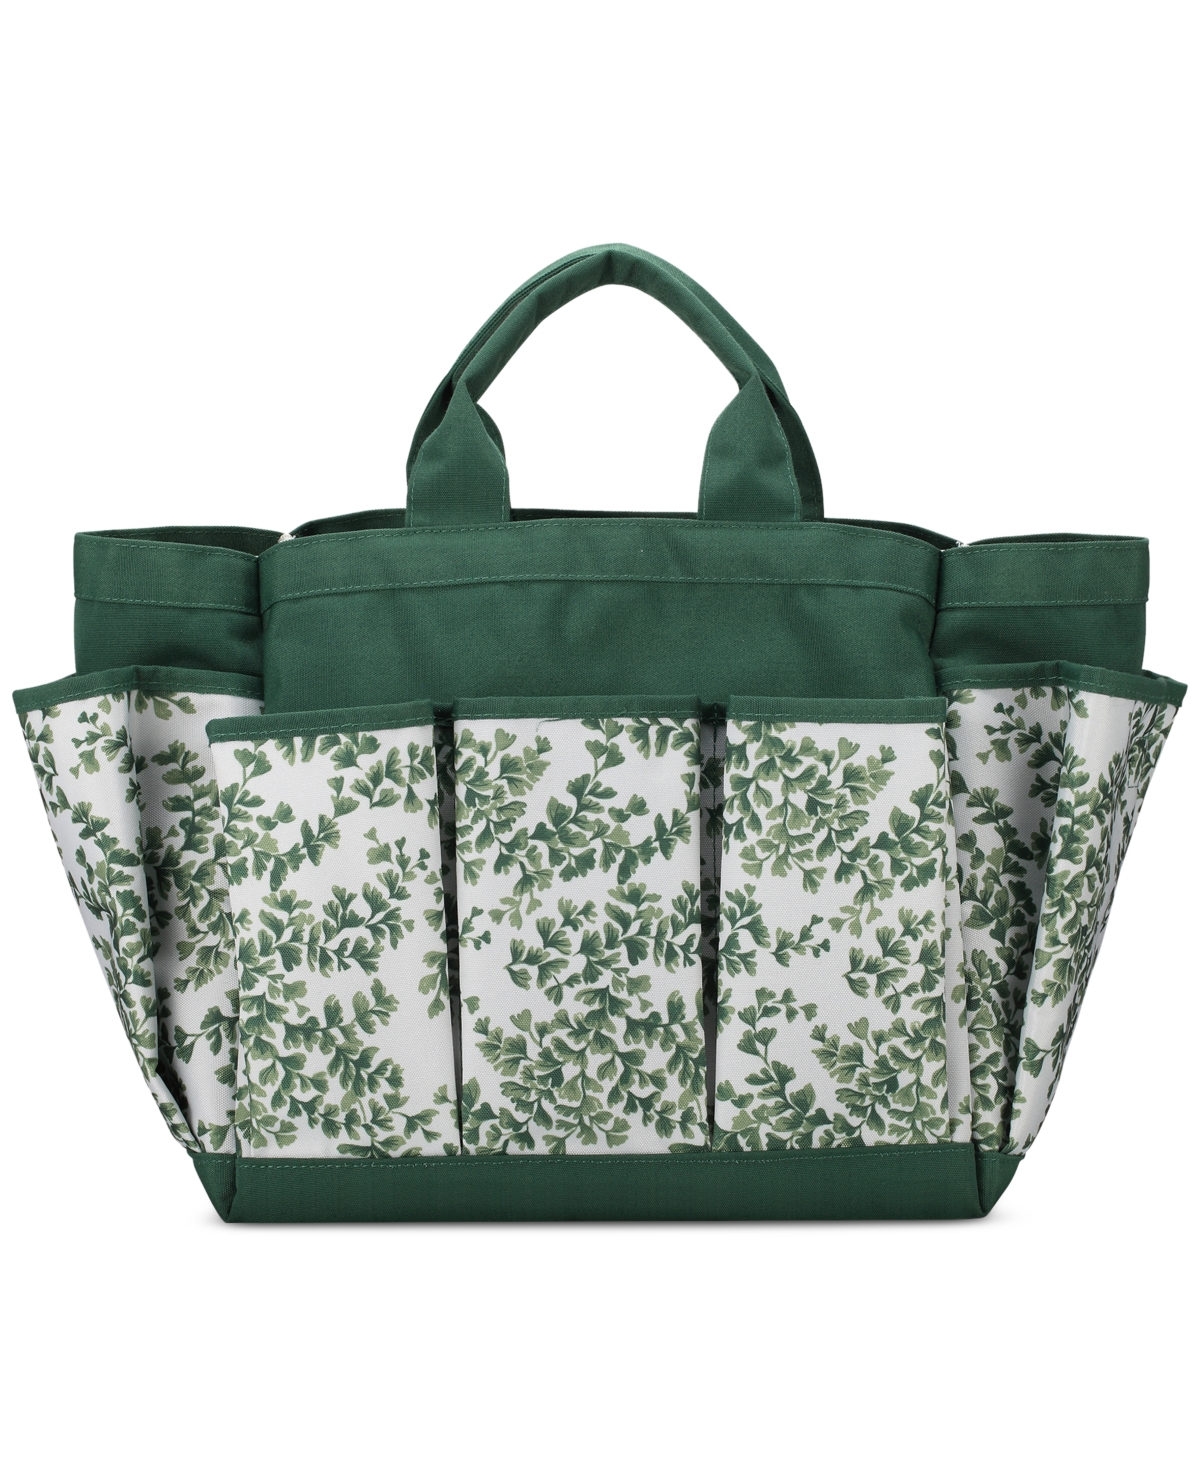 Flower Show Garden Tote, Created for Macy's - Green Leaf